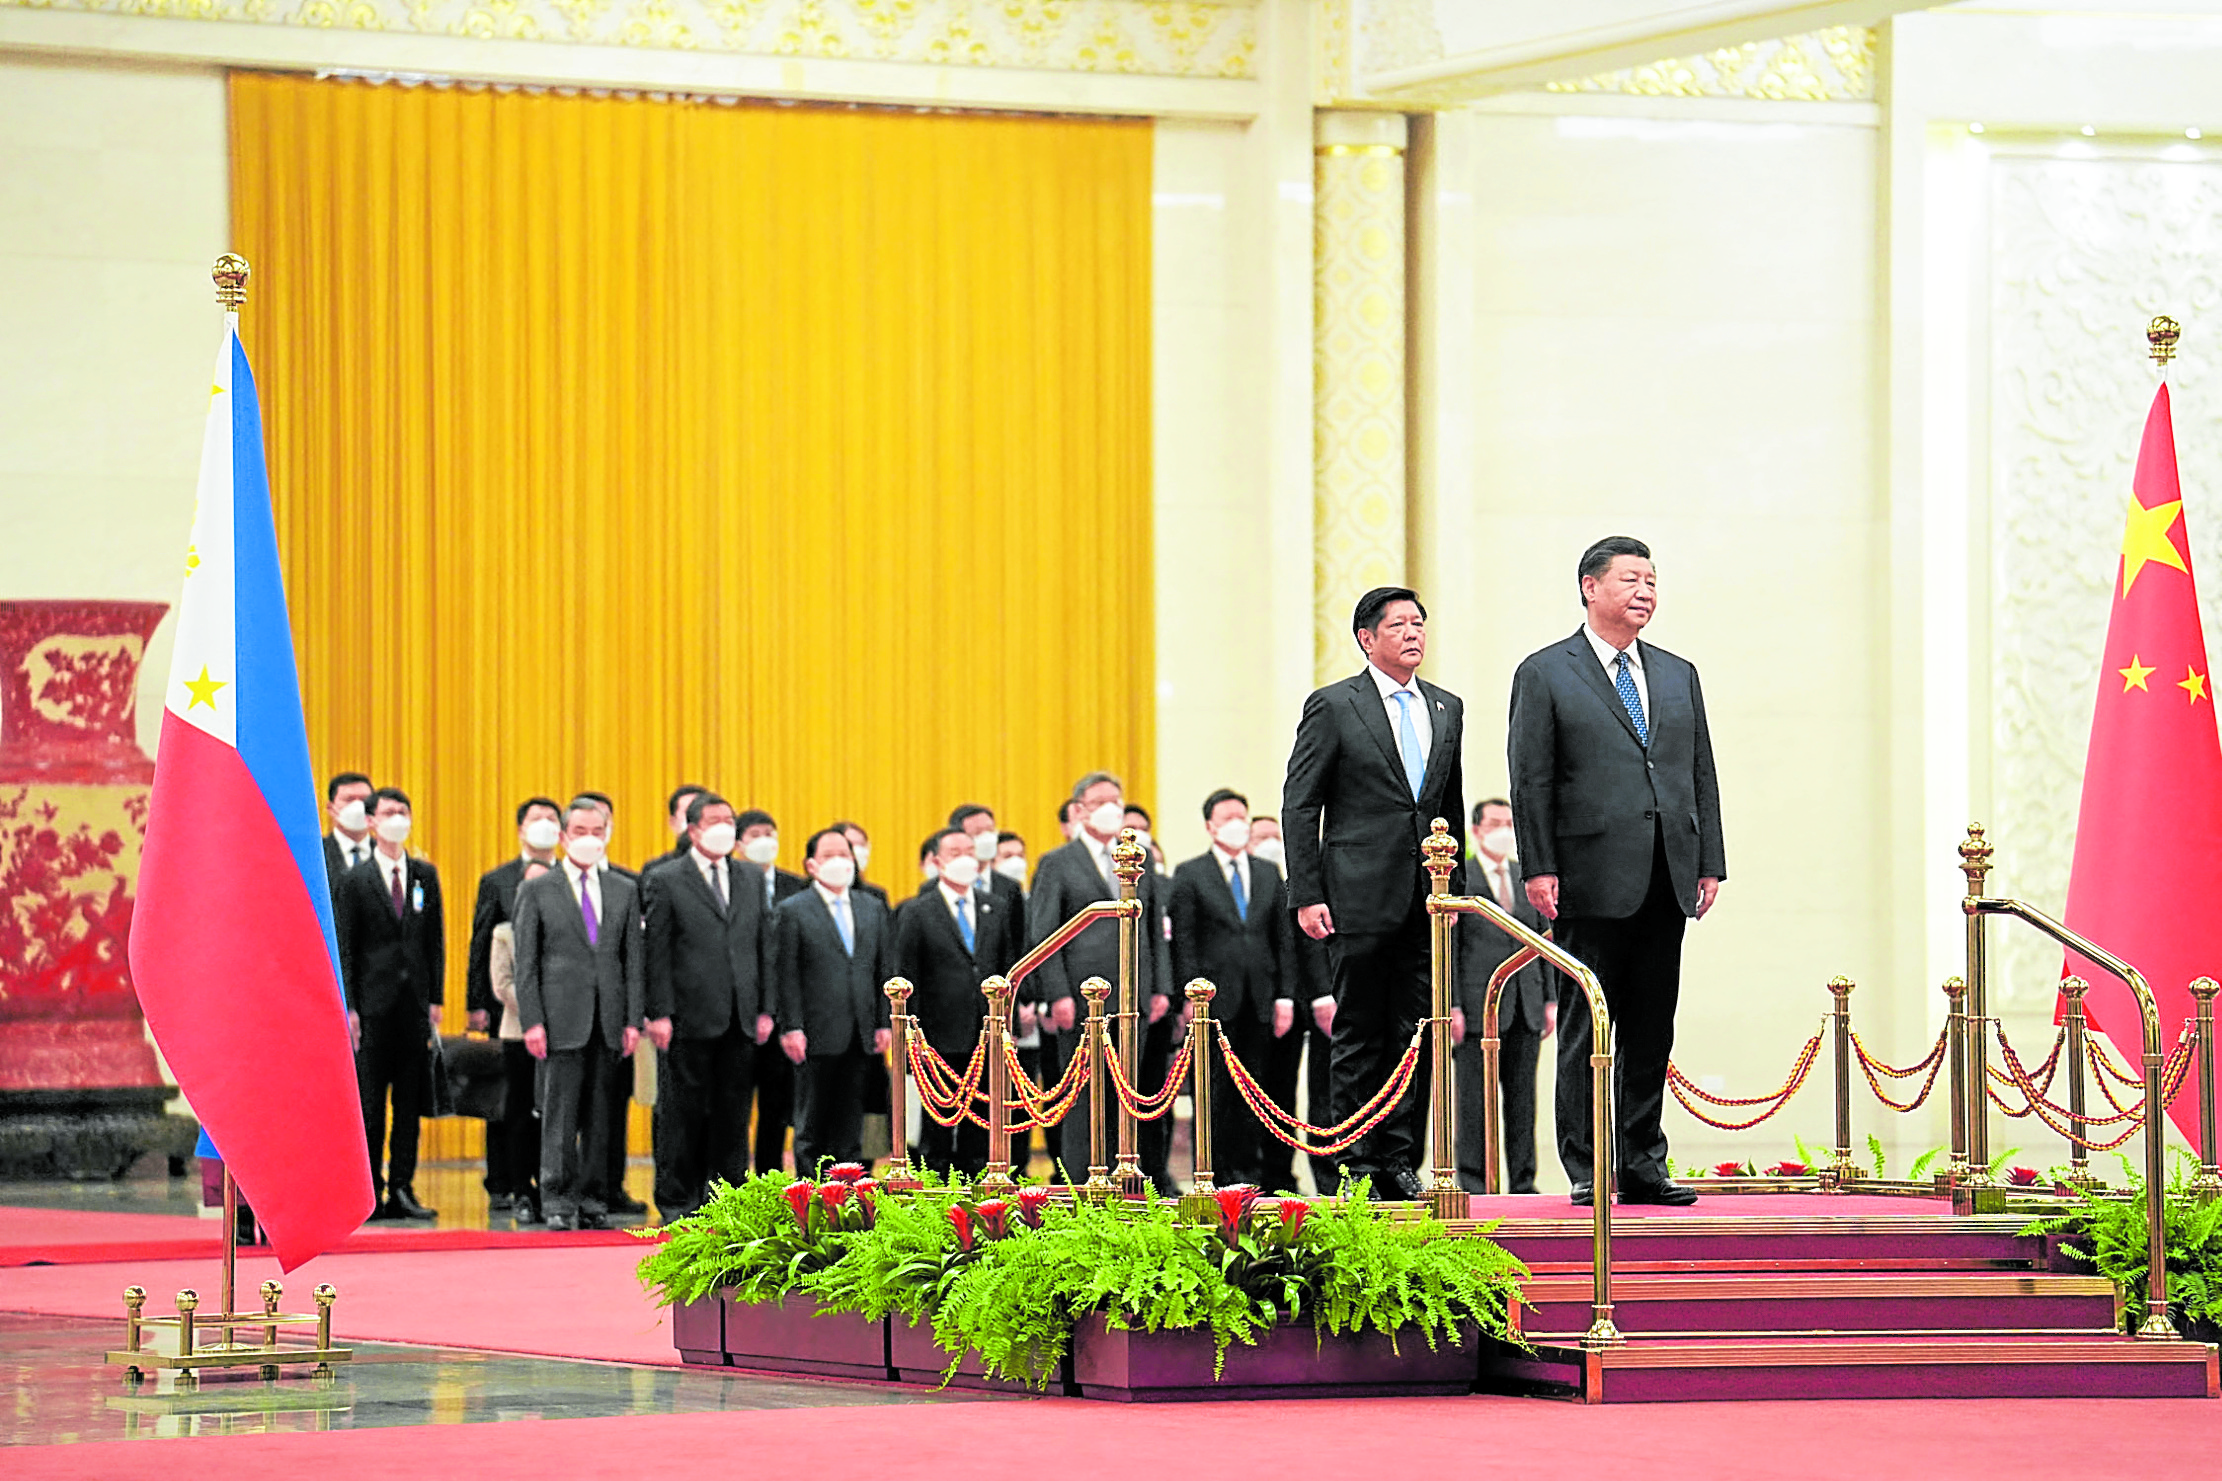 Chinese President Xi Jinping leads PresidentMarcos into Beijing’s Great Hall of the People during the Philippine leader’s state visit to China 